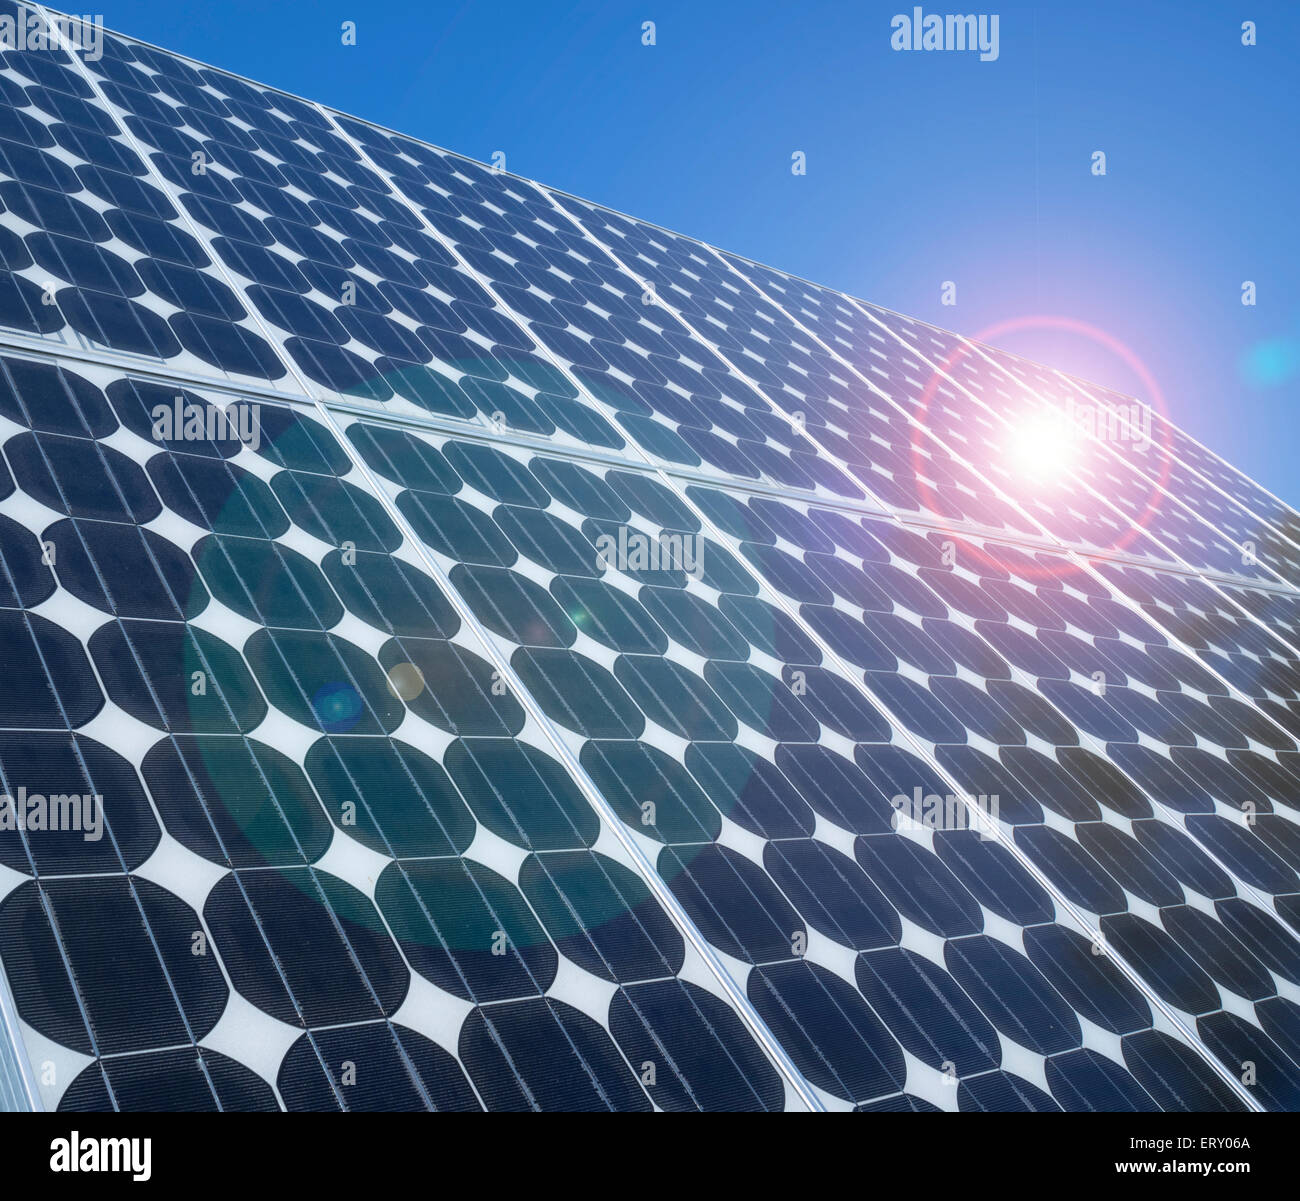 Photovoltaic cells array close up blue lens flare sunlight reflection on solar panels Sustainable eco friendly green energy abstract background Stock Photo